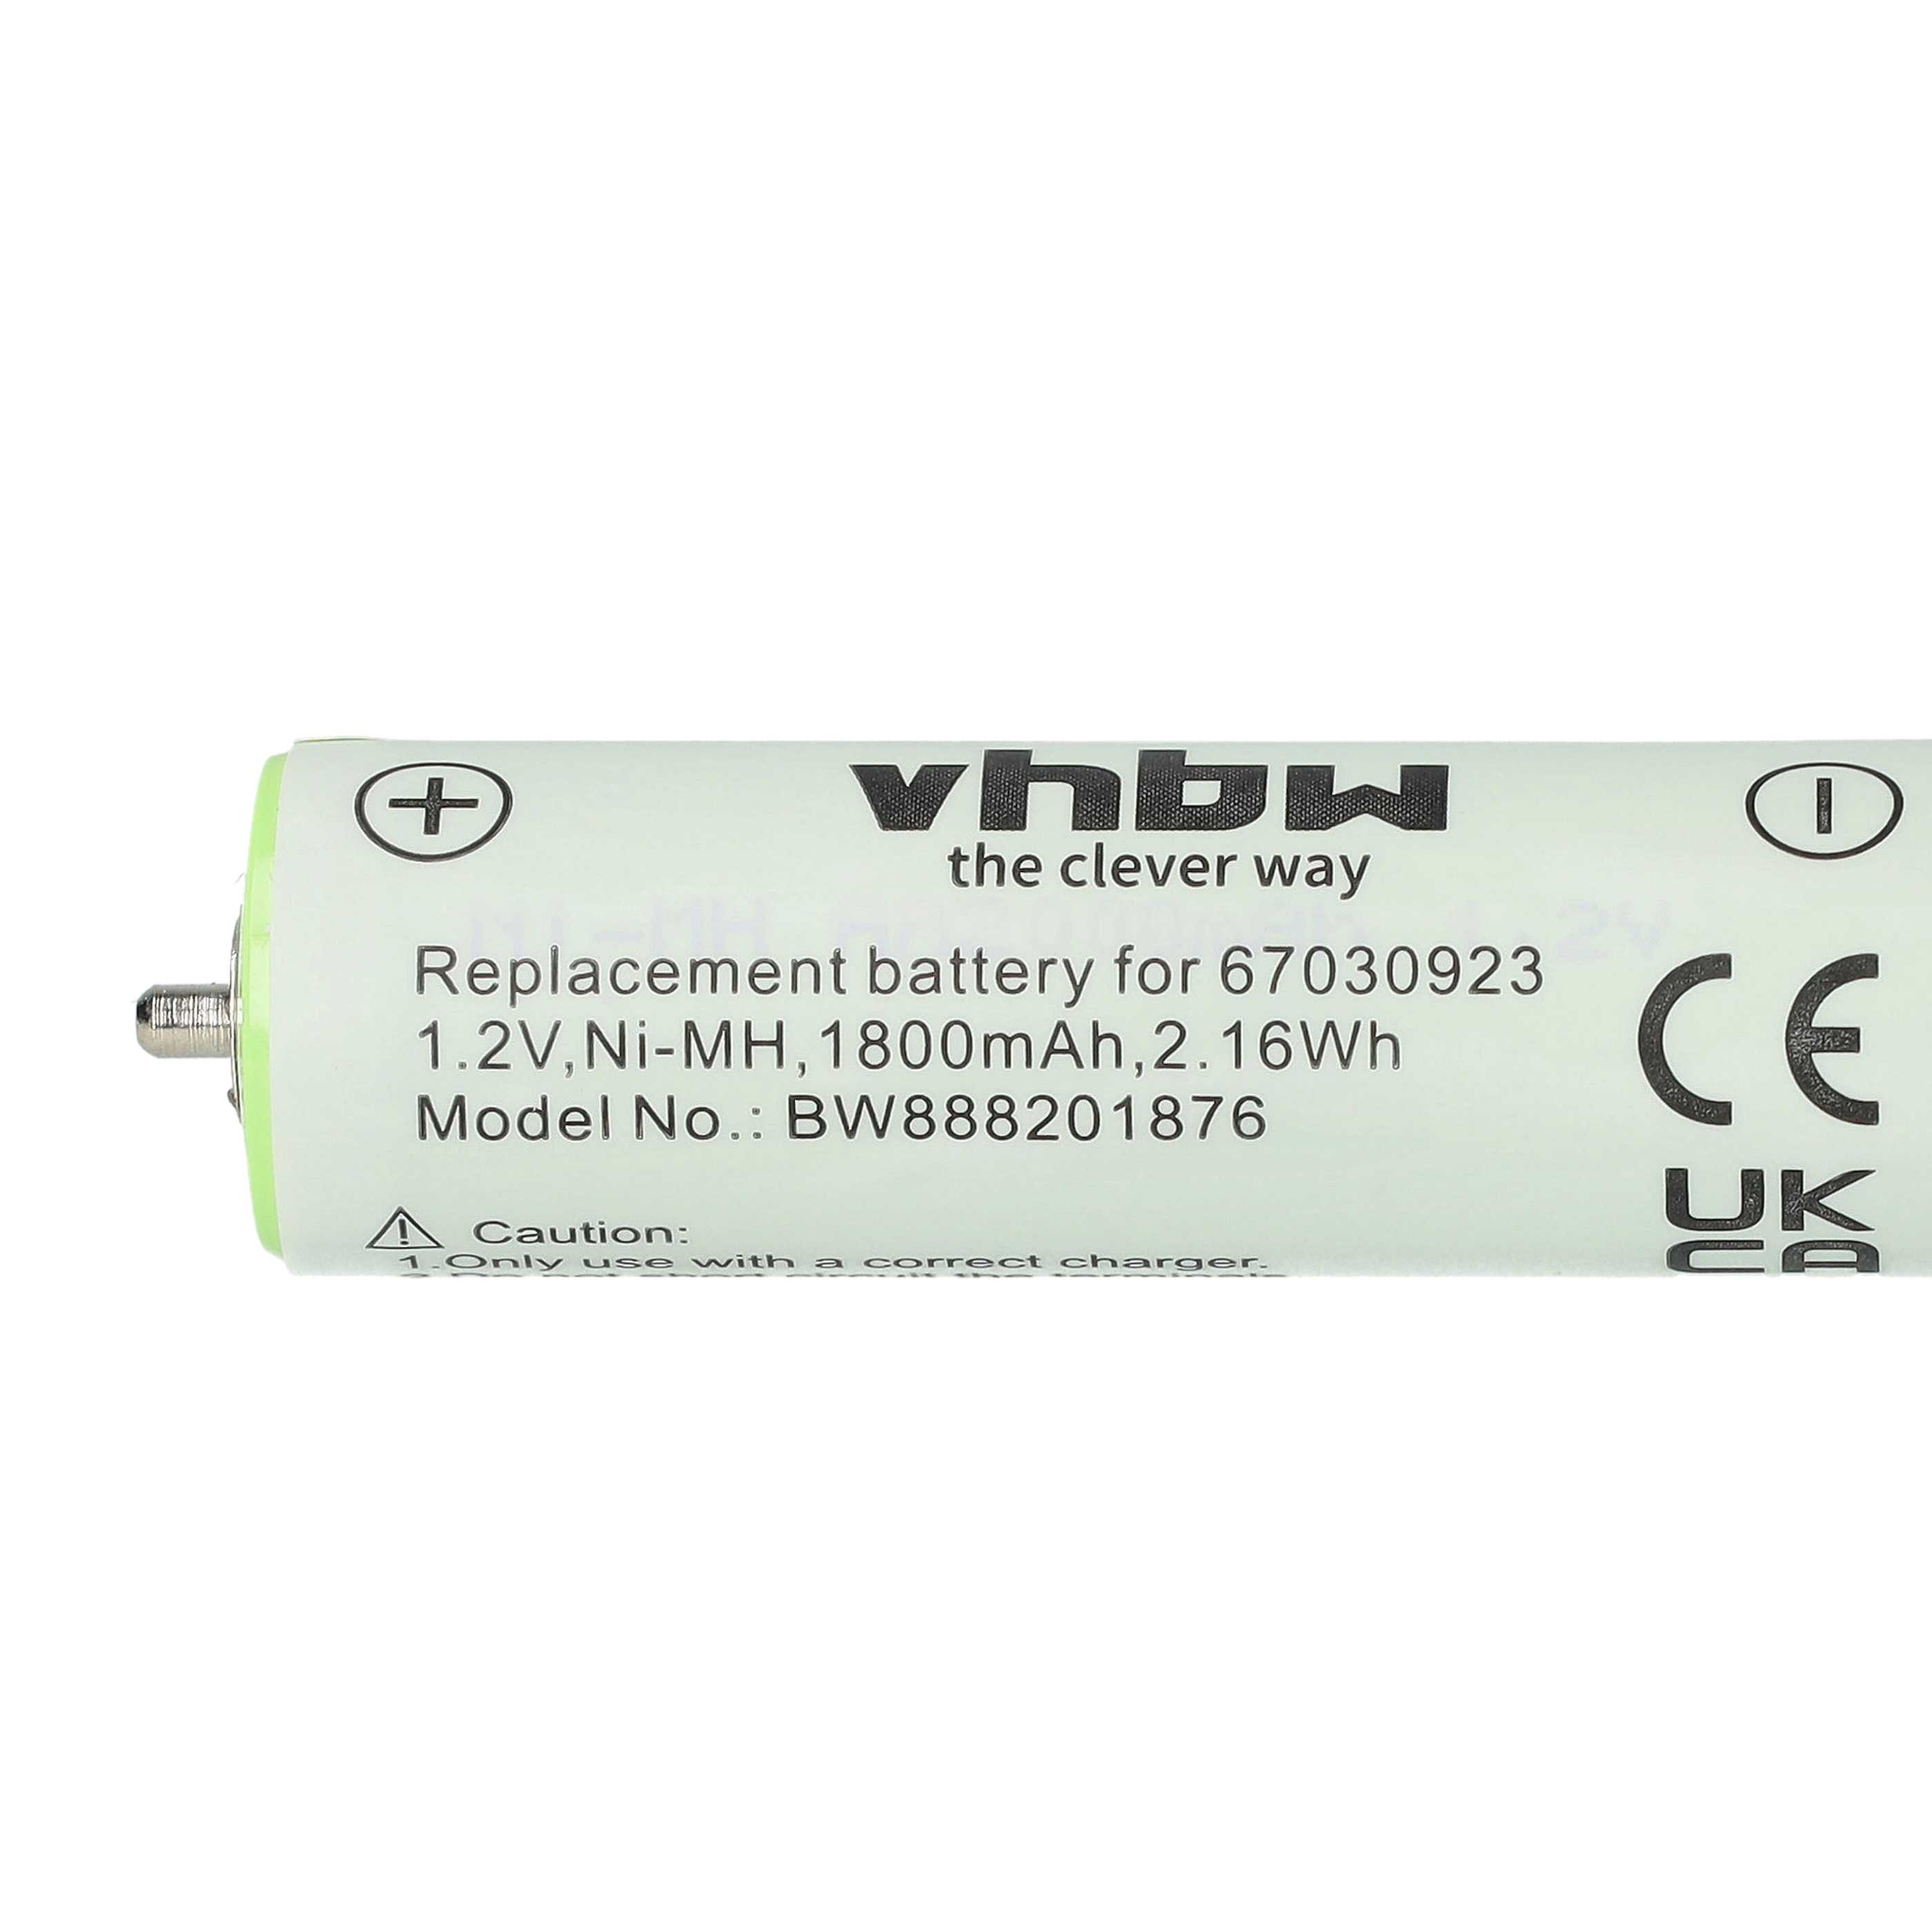 Electric Razor Battery (2 Units) Replacement for Braun 1HR-AAAUV, 67030834, 67030165 - 1800mAh 1.2V NiMH